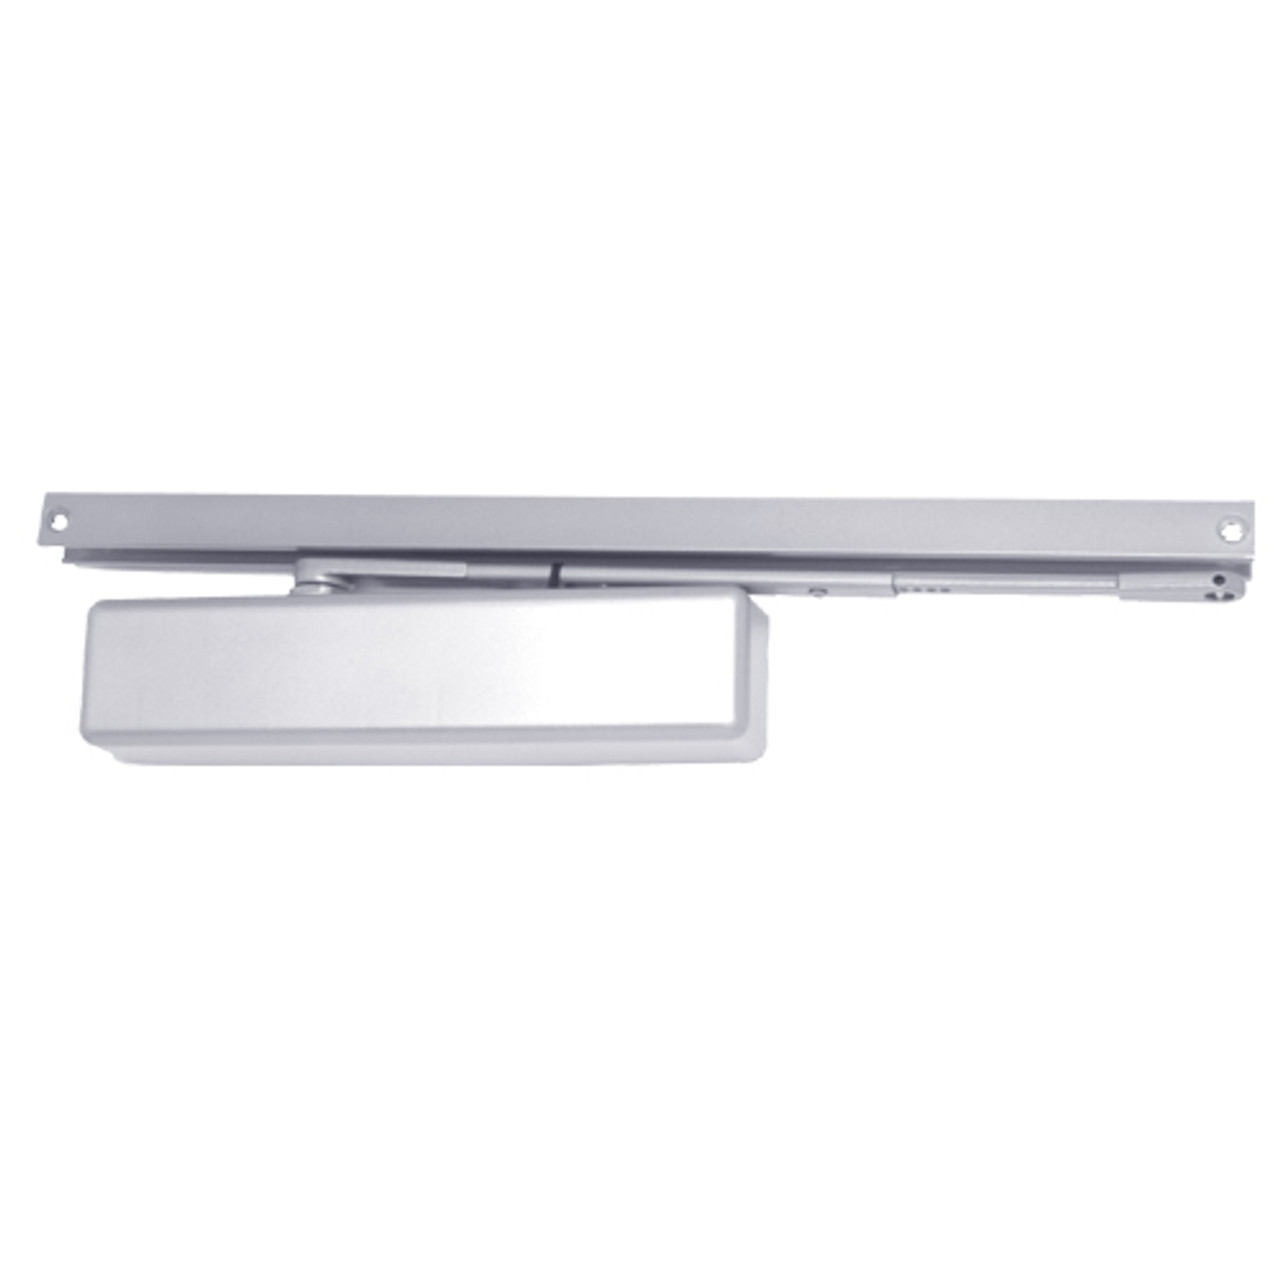 1461T-H-BUMPER-US26-FC LCN Surface Mount Door Closer with Hold Open Track with Bumper in Bright Chrome Finish